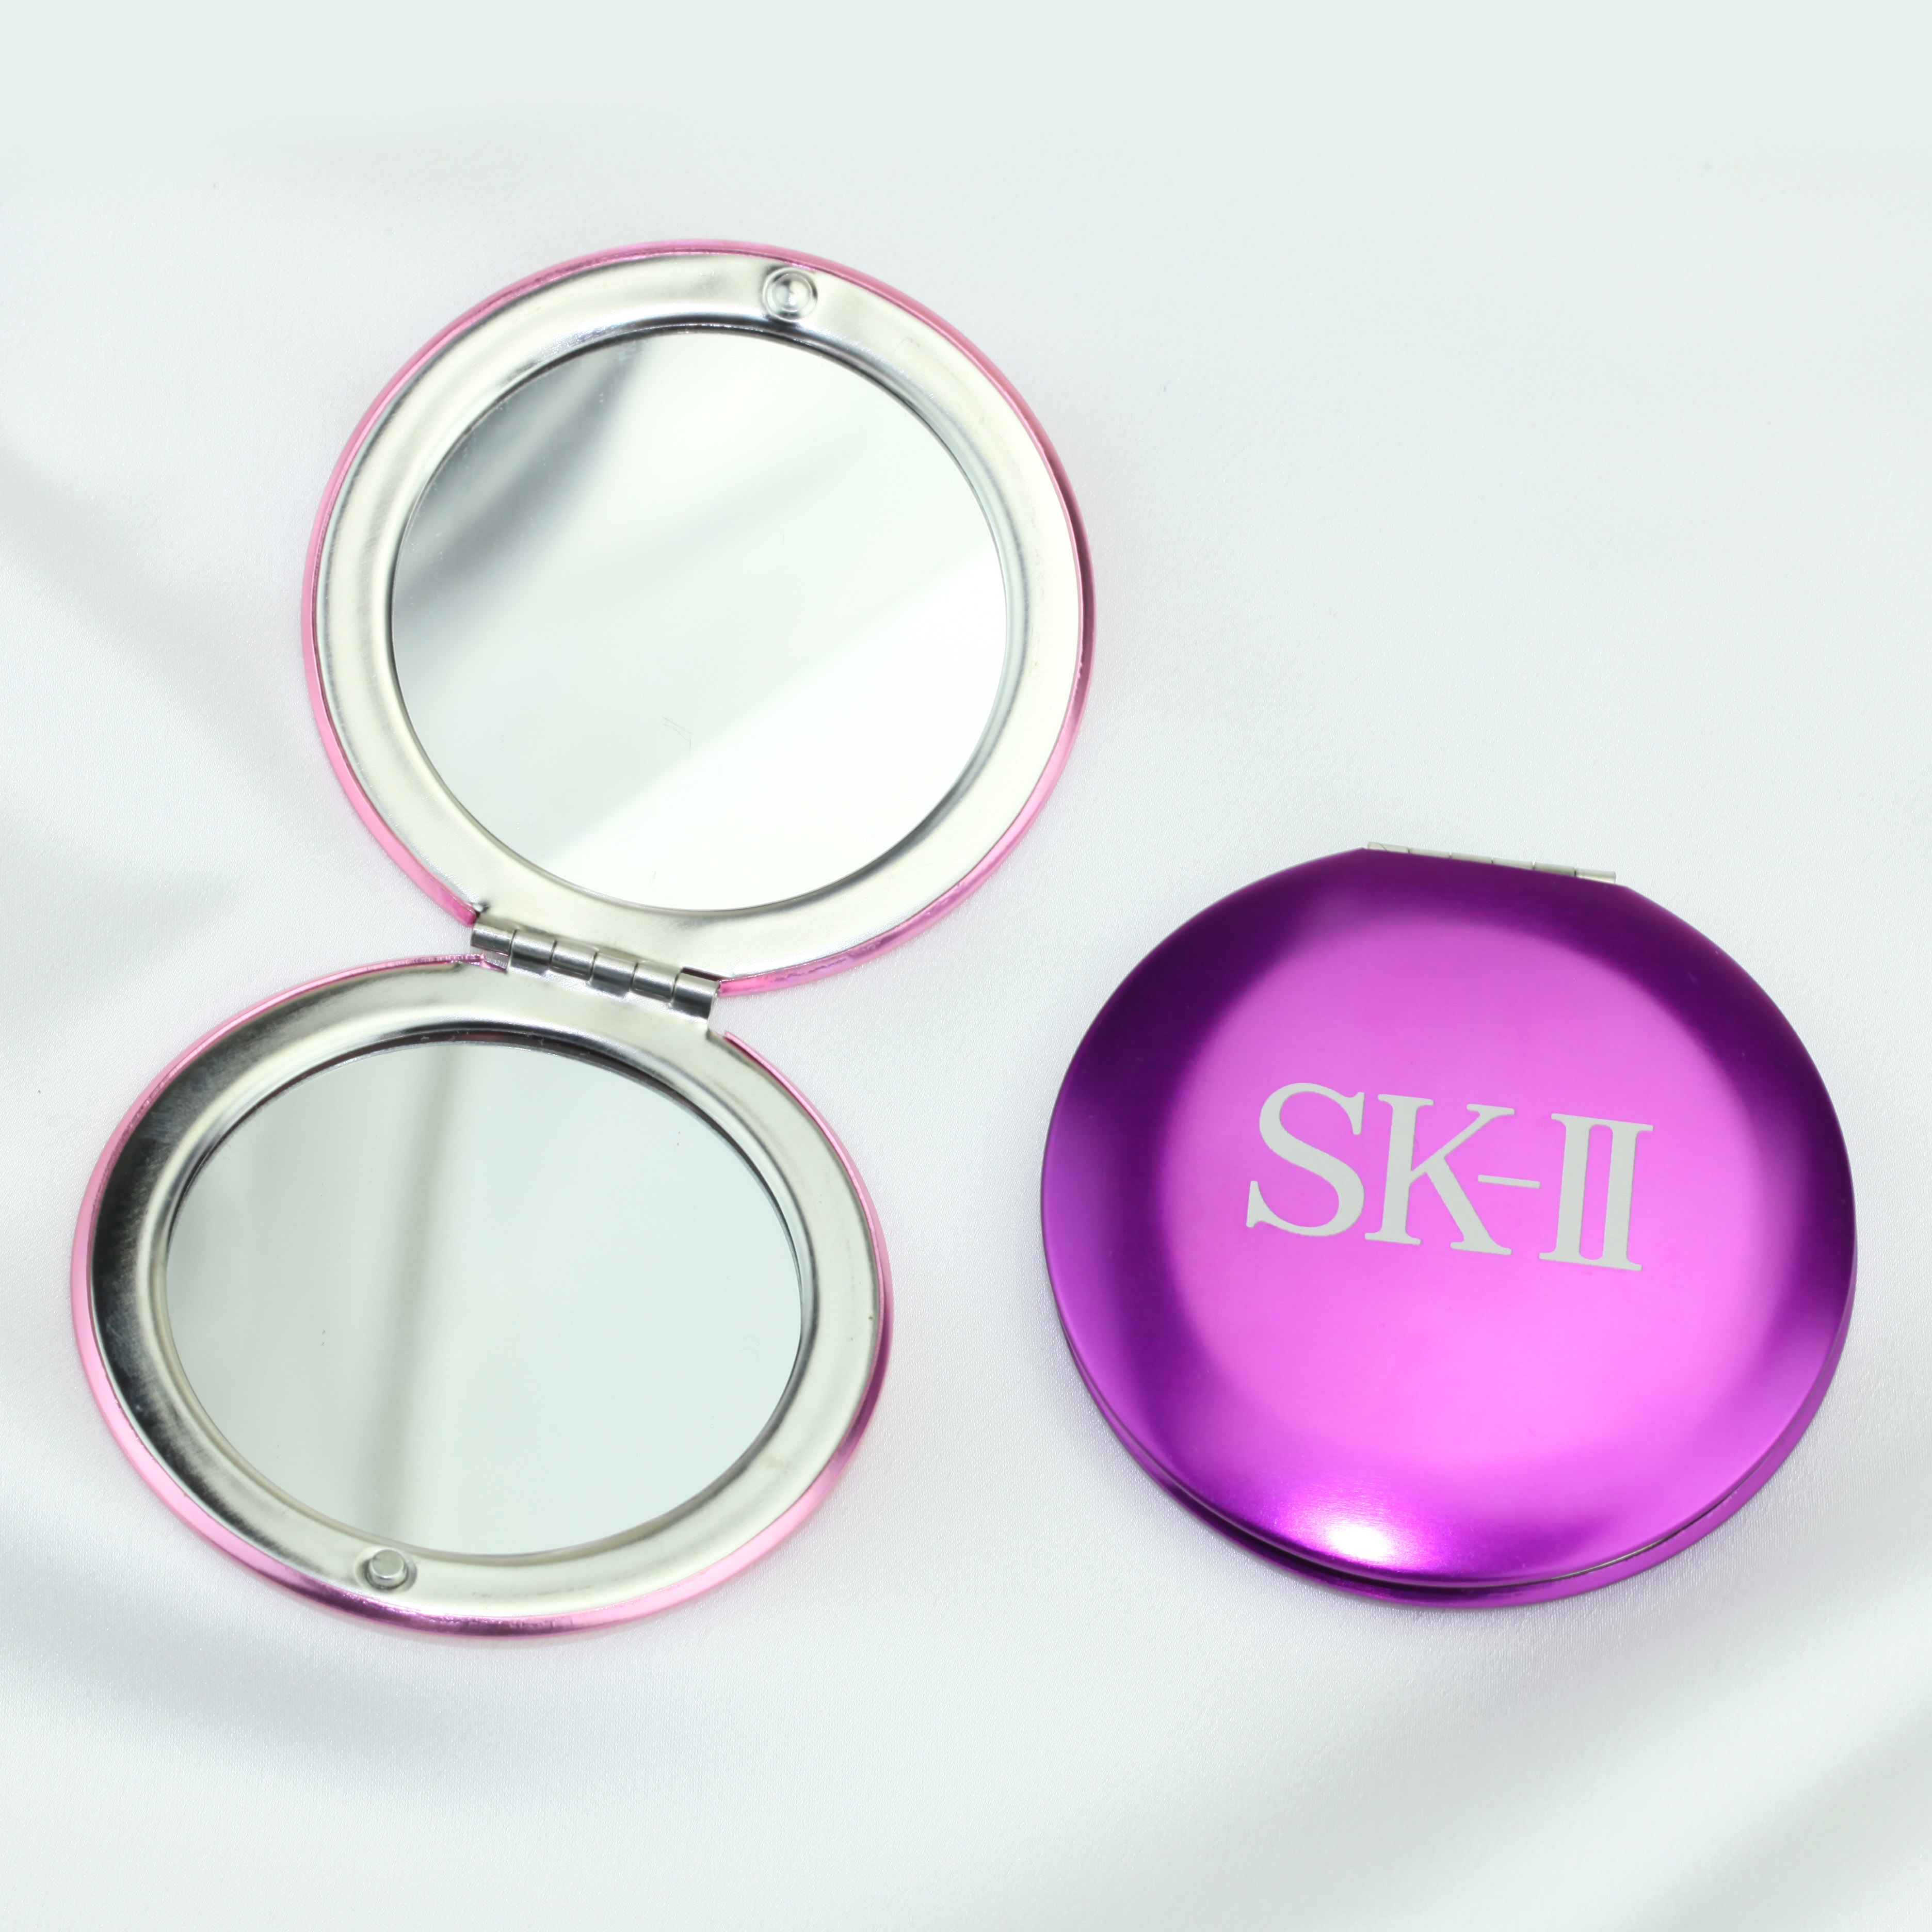 5mm thickness aluminum makeup mirror where to buy